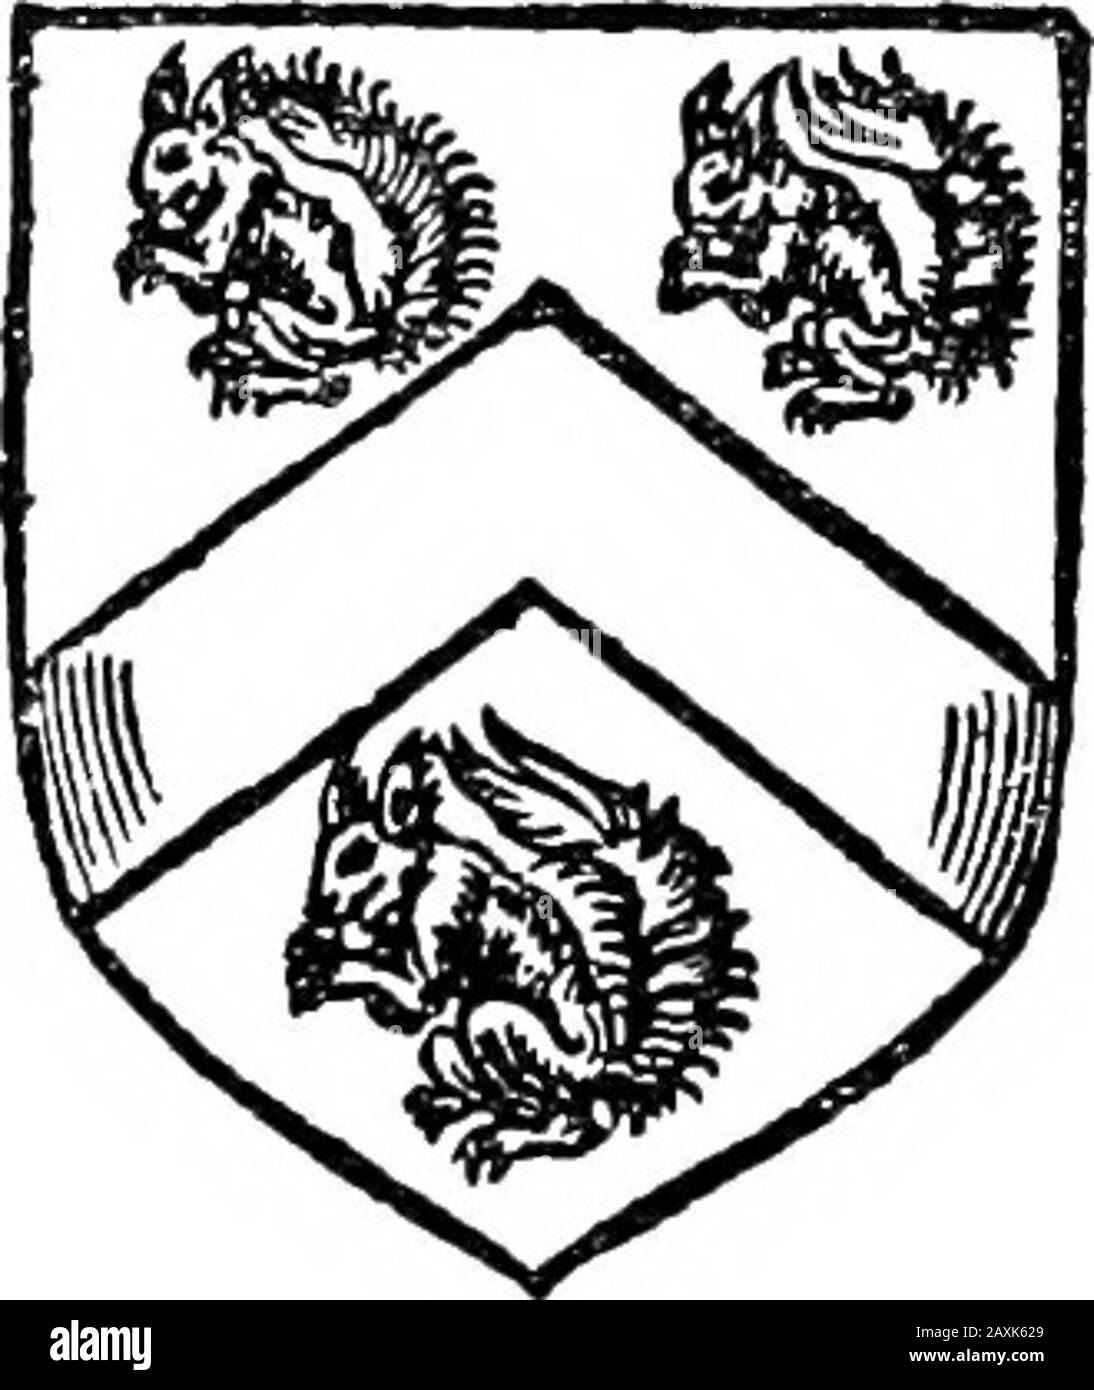 Peacham's Compleat gentleman, 1634 . The field is parted per paleGules and Azure three Eaglesdifplaide Argent, a Label! Orfor diflFerence, this Coate Ar-mour pertaineth to Sir RobertCoke, Knight. He beareth Pearle, a Cheve-ron Safhtre, betweene threeSquirrels Seiant of the Ruby,by the name of Lovell, ThisCoate is thus borne by theRight Worlhipfull Sir FraTtcisLovell J Knight, in the Countyof Norfolie. This was alfo the Coate ofSir Thomas Lovell^ Knight ofthe Garter,made by King Henrjfthe feuenth, of whofe houfe hee was Treafurer andPrefident of the Councell. This Sir Thomas Lovell was afift fo Stock Photo